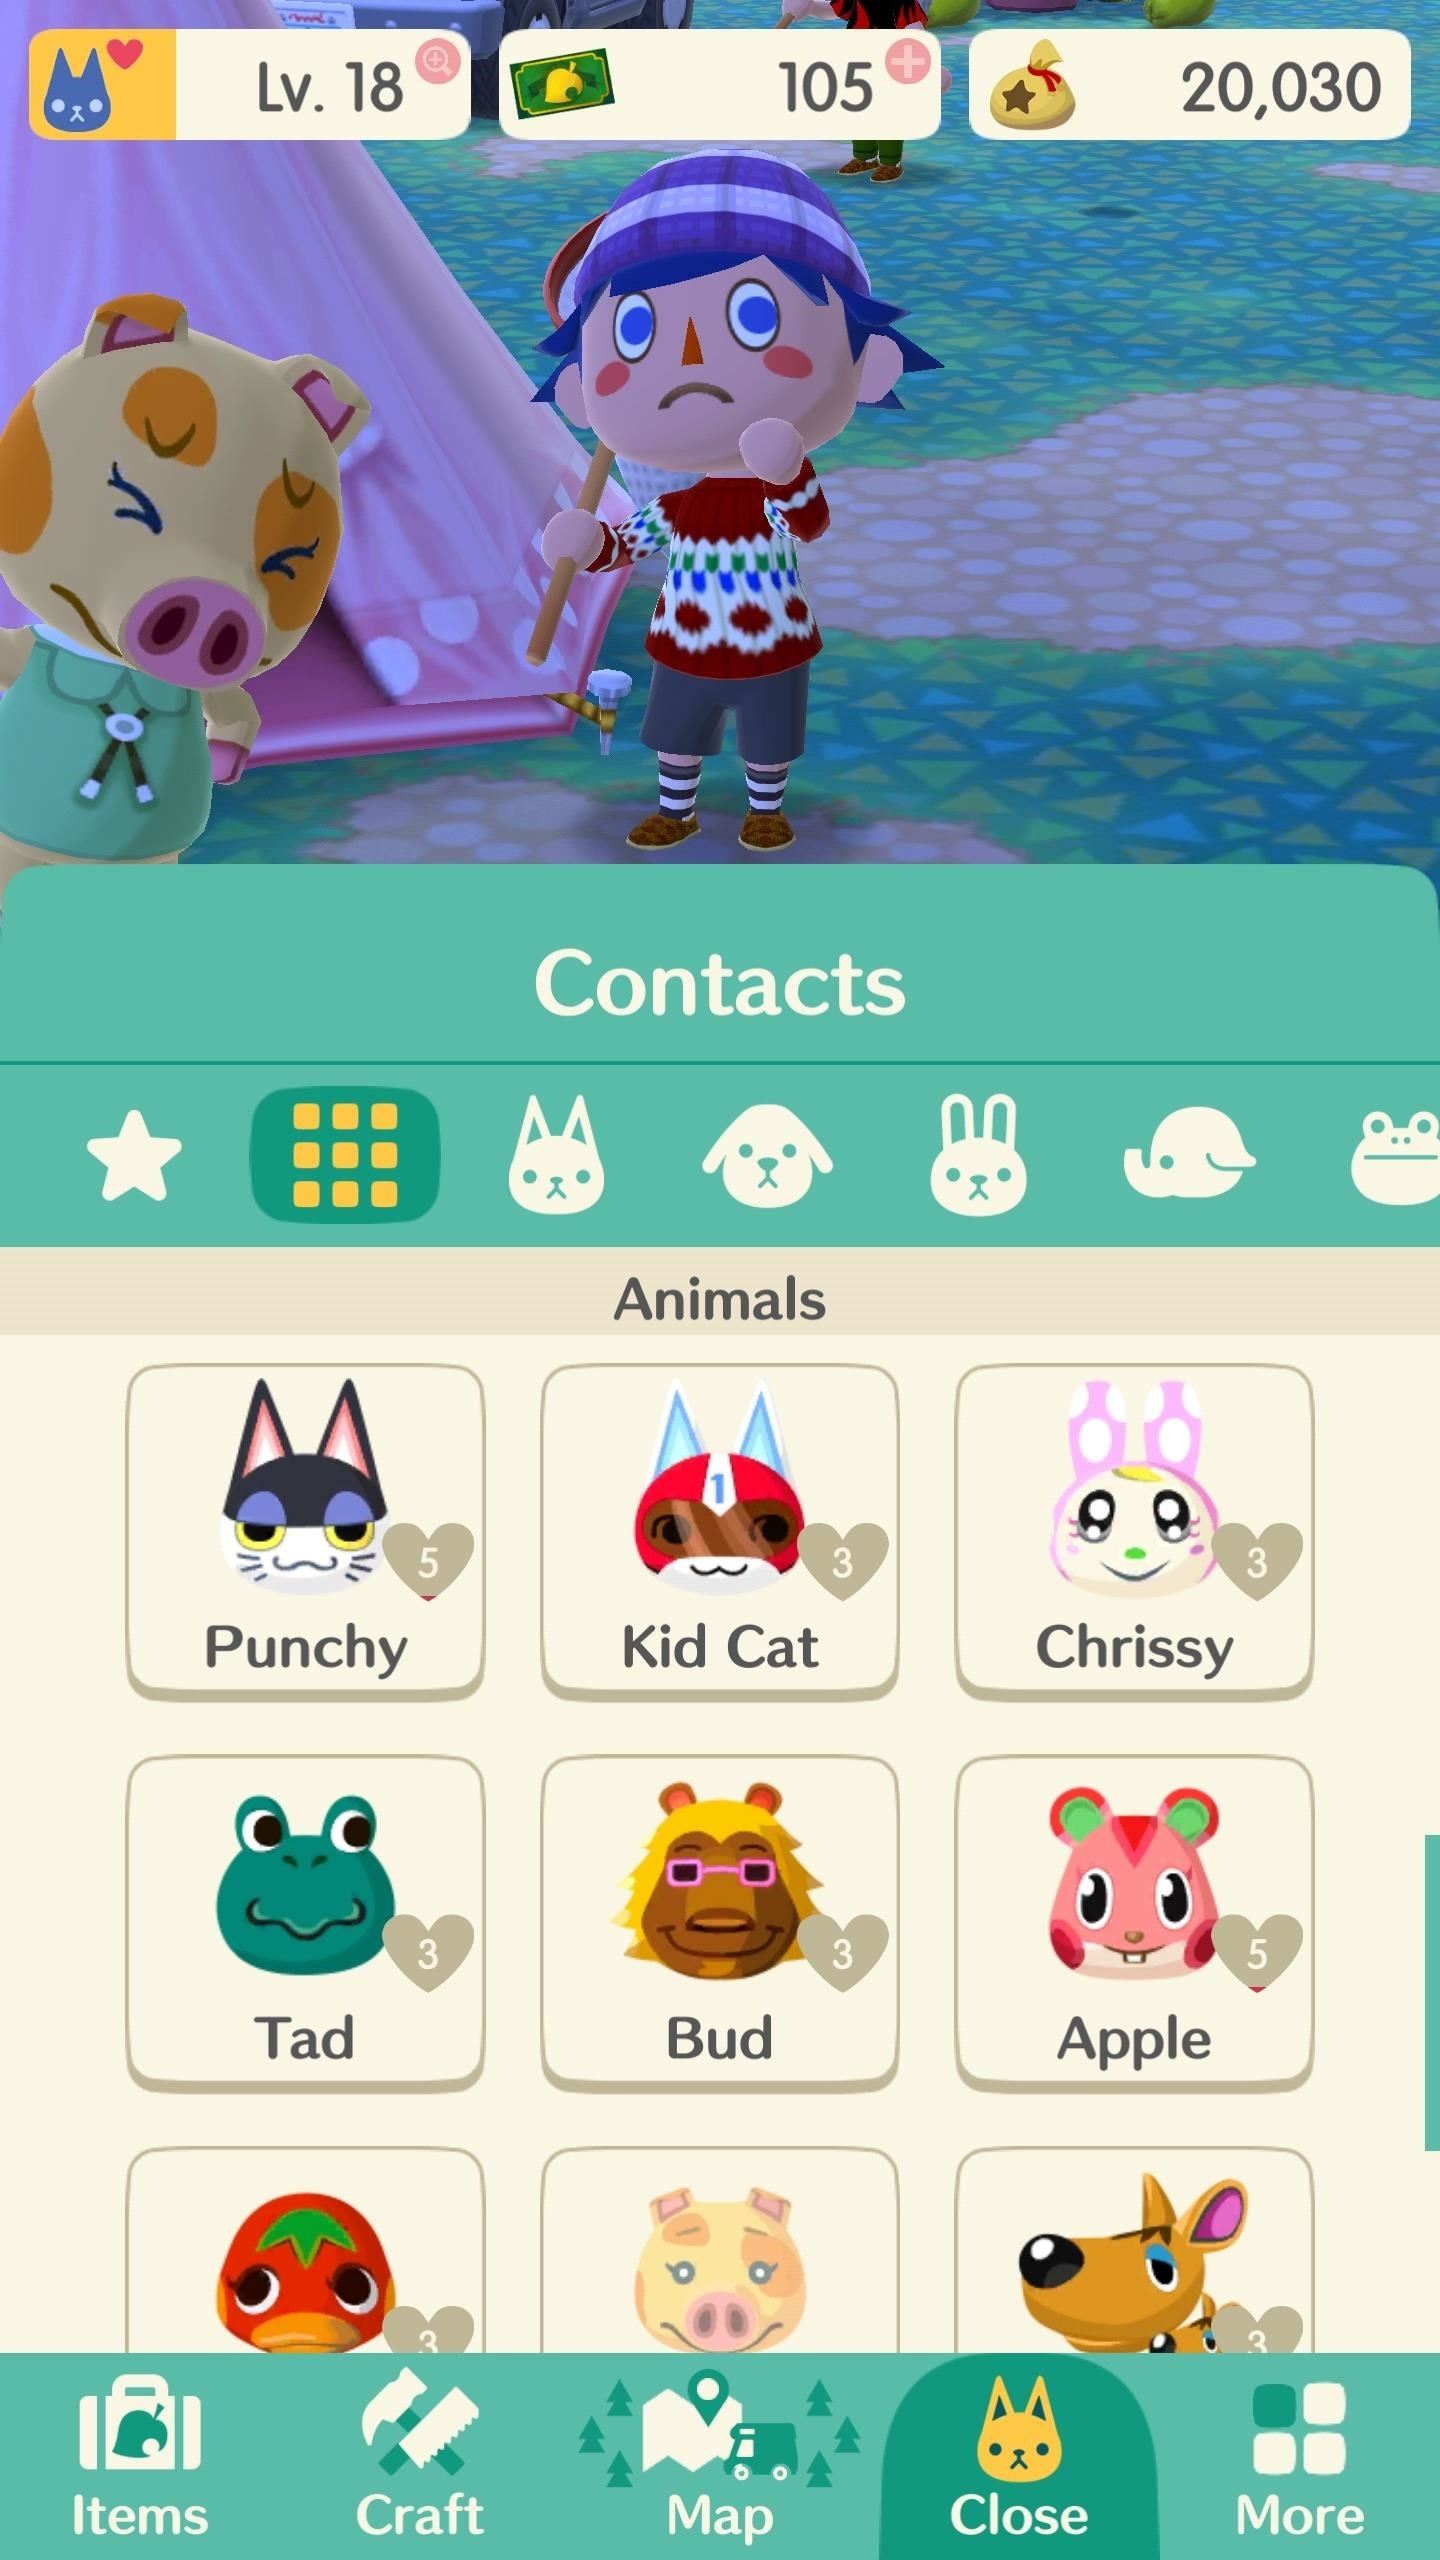 Pocket Camp 101: How to Get Your Animal Friends to Come to Your Campsite in Animal Crossing